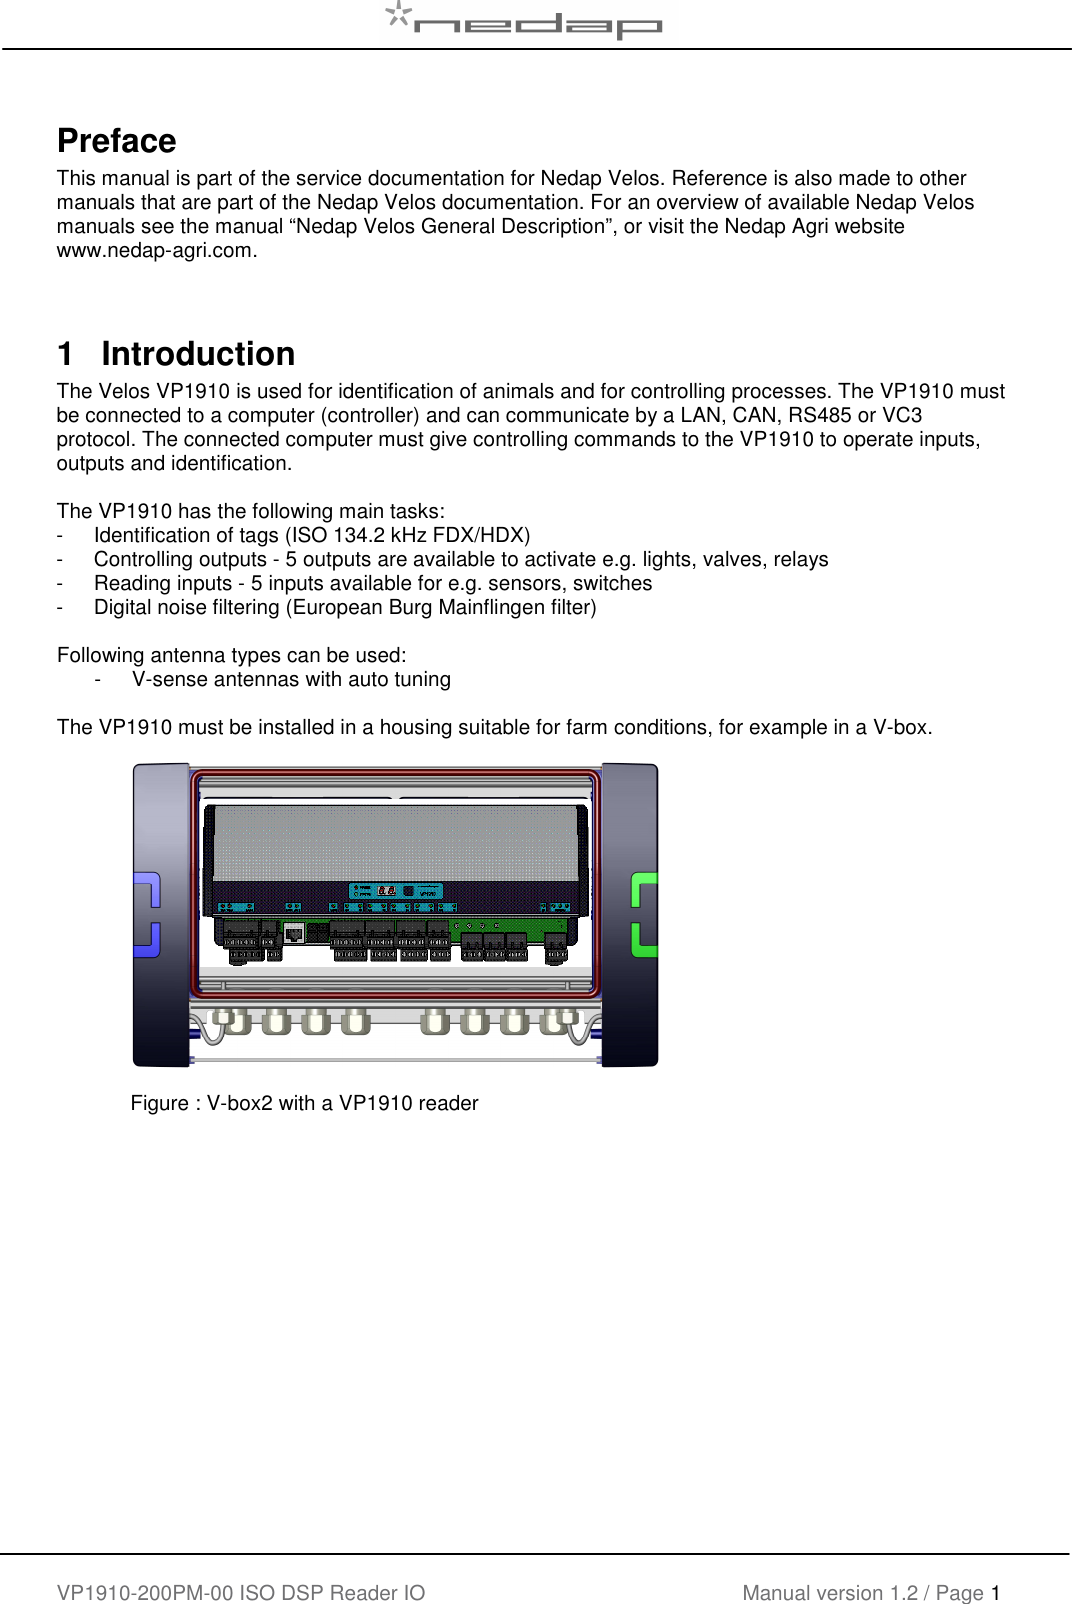    VP1910-200PM-00 ISO DSP Reader IO Manual version 1.2 / Page 1    Preface This manual is part of the service documentation for Nedap Velos. Reference is also made to other manuals that are part of the Nedap Velos documentation. For an overview of available Nedap Velos manuals see the manual “Nedap Velos General Description”, or visit the Nedap Agri website www.nedap-agri.com.     1  Introduction The Velos VP1910 is used for identification of animals and for controlling processes. The VP1910 must be connected to a computer (controller) and can communicate by a LAN, CAN, RS485 or VC3 protocol. The connected computer must give controlling commands to the VP1910 to operate inputs, outputs and identification.   The VP1910 has the following main tasks: -  Identification of tags (ISO 134.2 kHz FDX/HDX) -  Controlling outputs - 5 outputs are available to activate e.g. lights, valves, relays -  Reading inputs - 5 inputs available for e.g. sensors, switches -  Digital noise filtering (European Burg Mainflingen filter)  Following antenna types can be used: -  V-sense antennas with auto tuning  The VP1910 must be installed in a housing suitable for farm conditions, for example in a V-box.               Figure : V-box2 with a VP1910 reader    